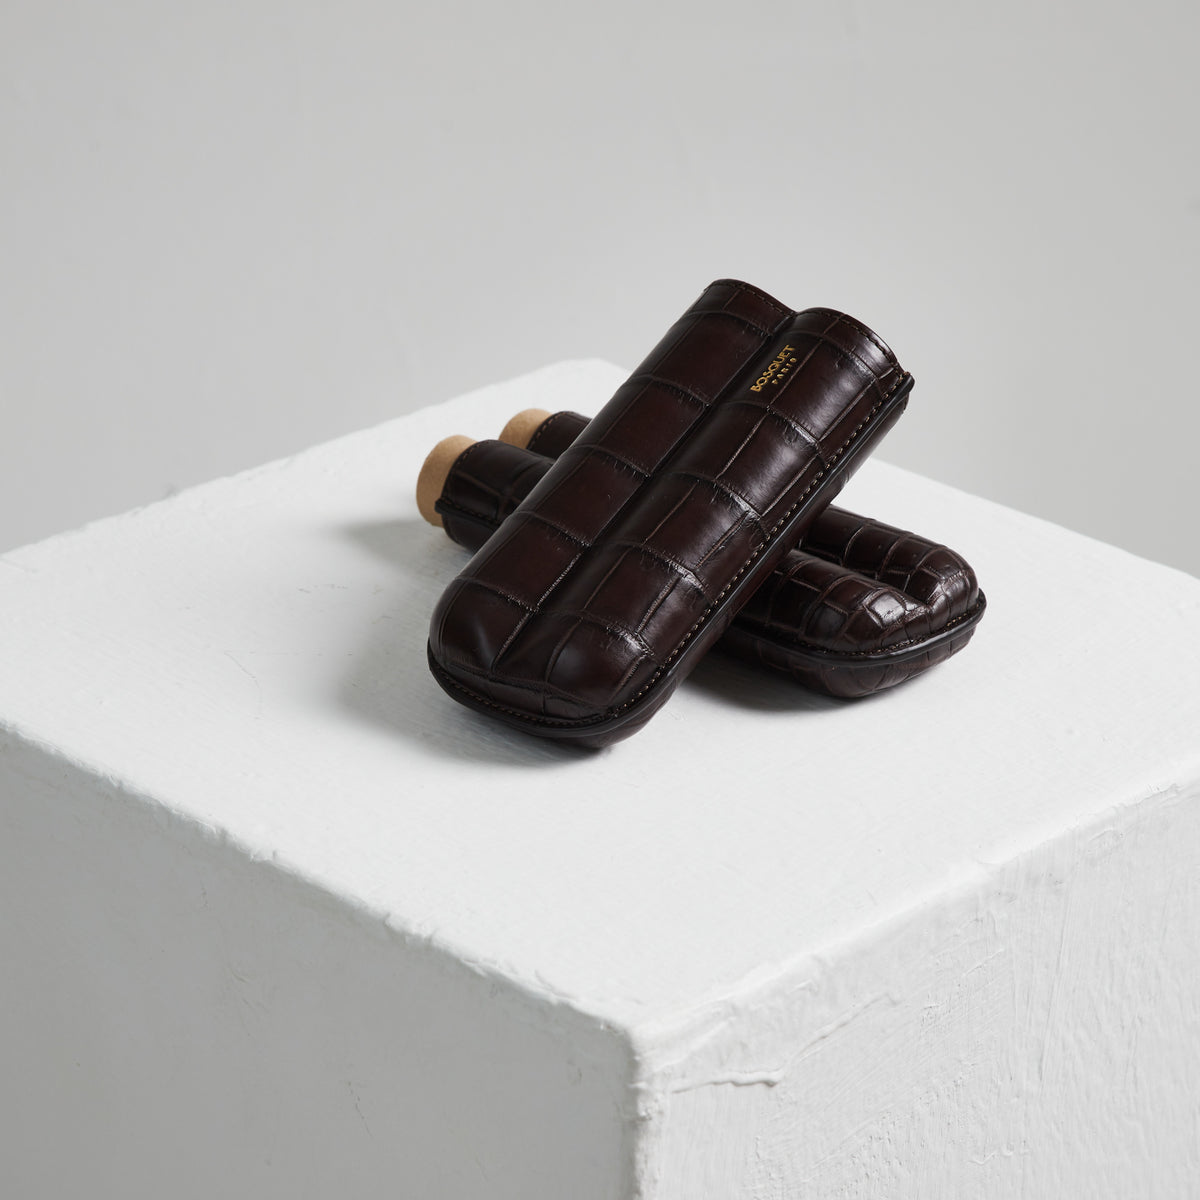 A pair of brown leather Bosque Crocodile cigar cases on a white cube.